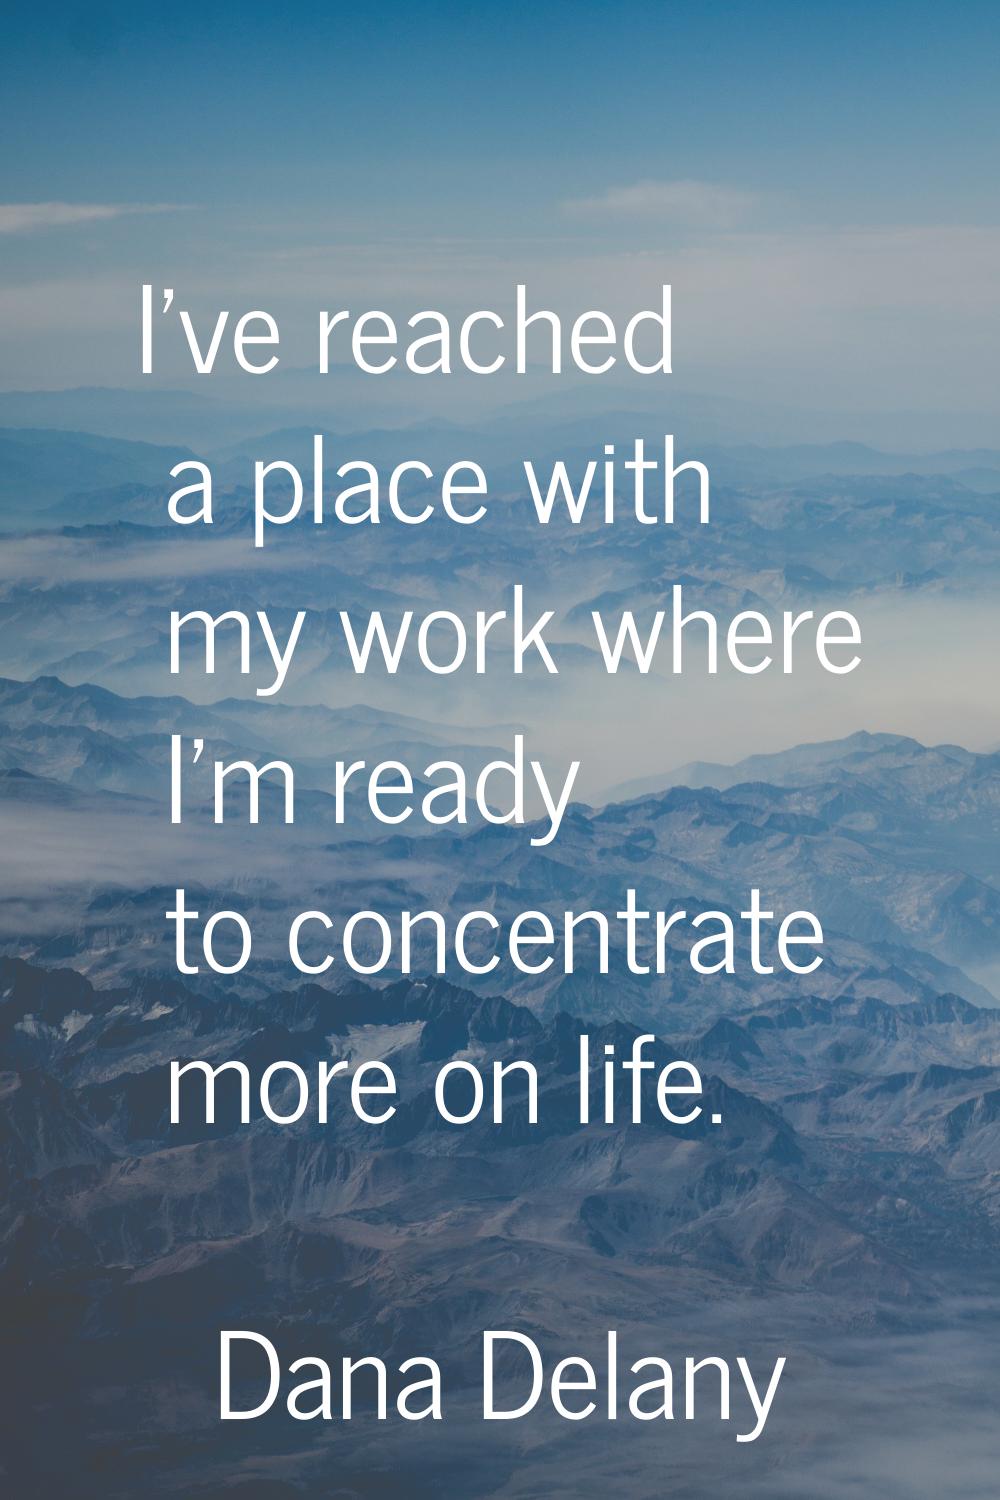 I've reached a place with my work where I'm ready to concentrate more on life.